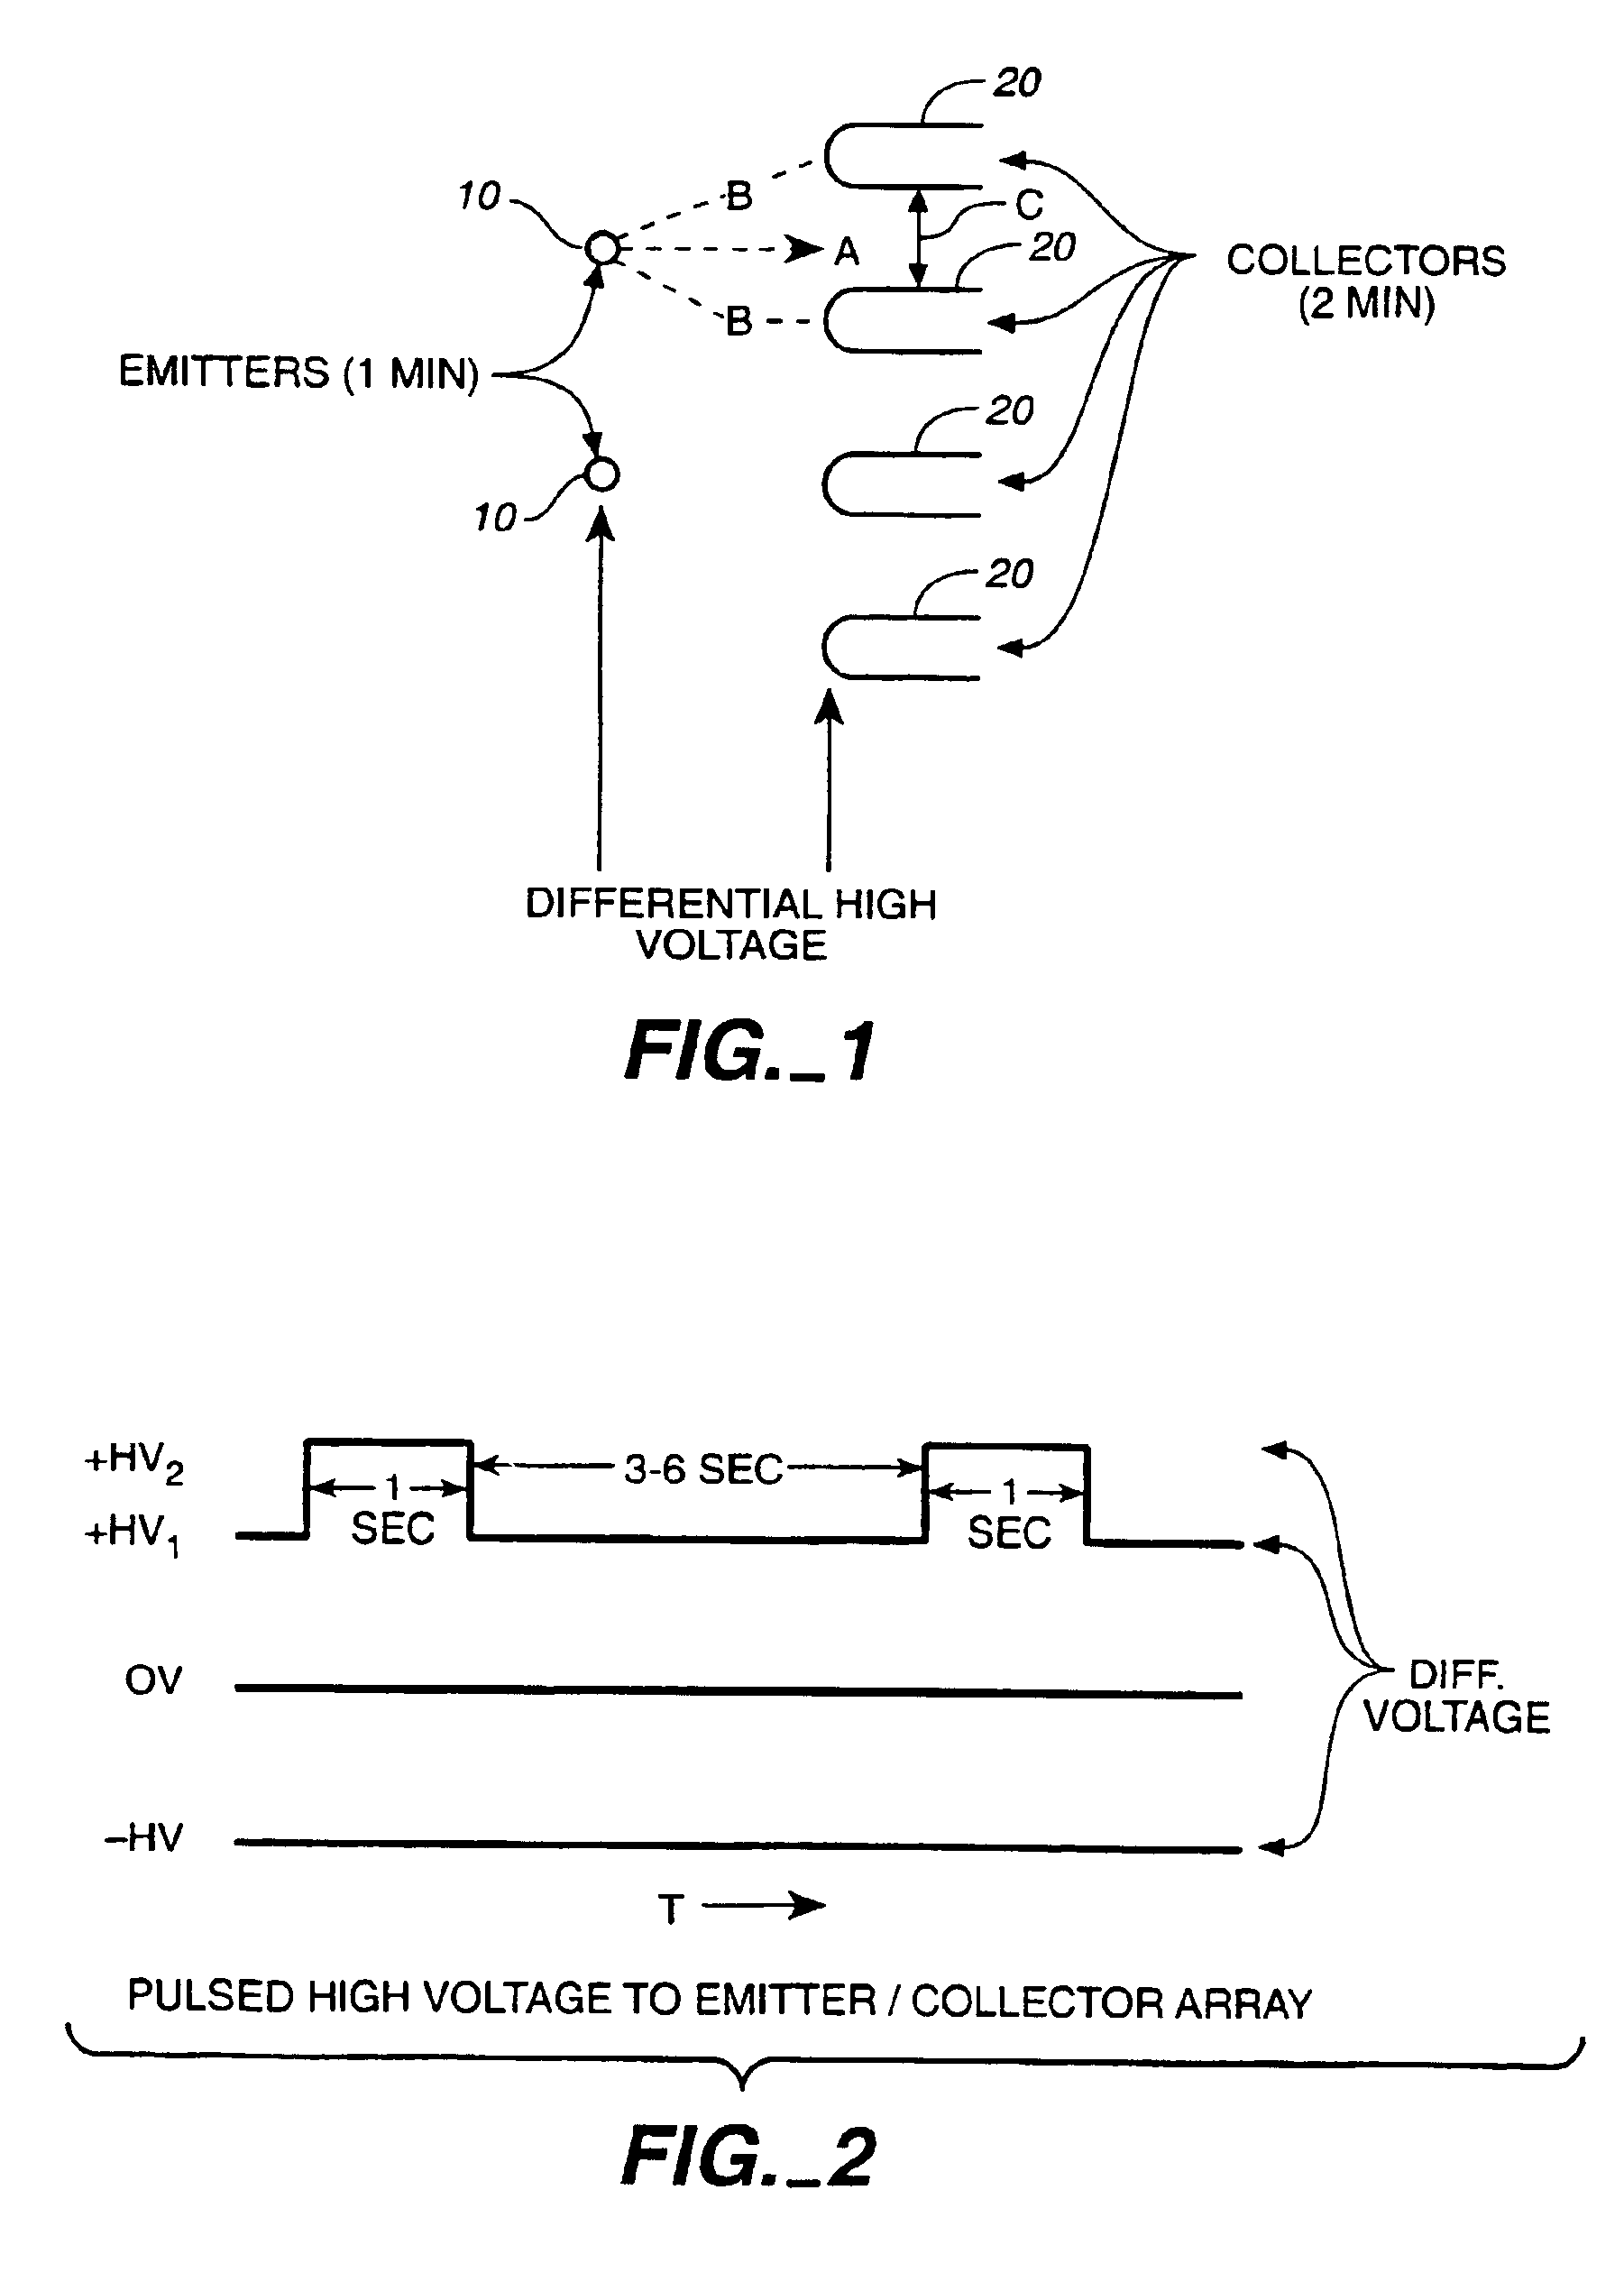 Method and apparatus to reduce ozone production in ion wind device